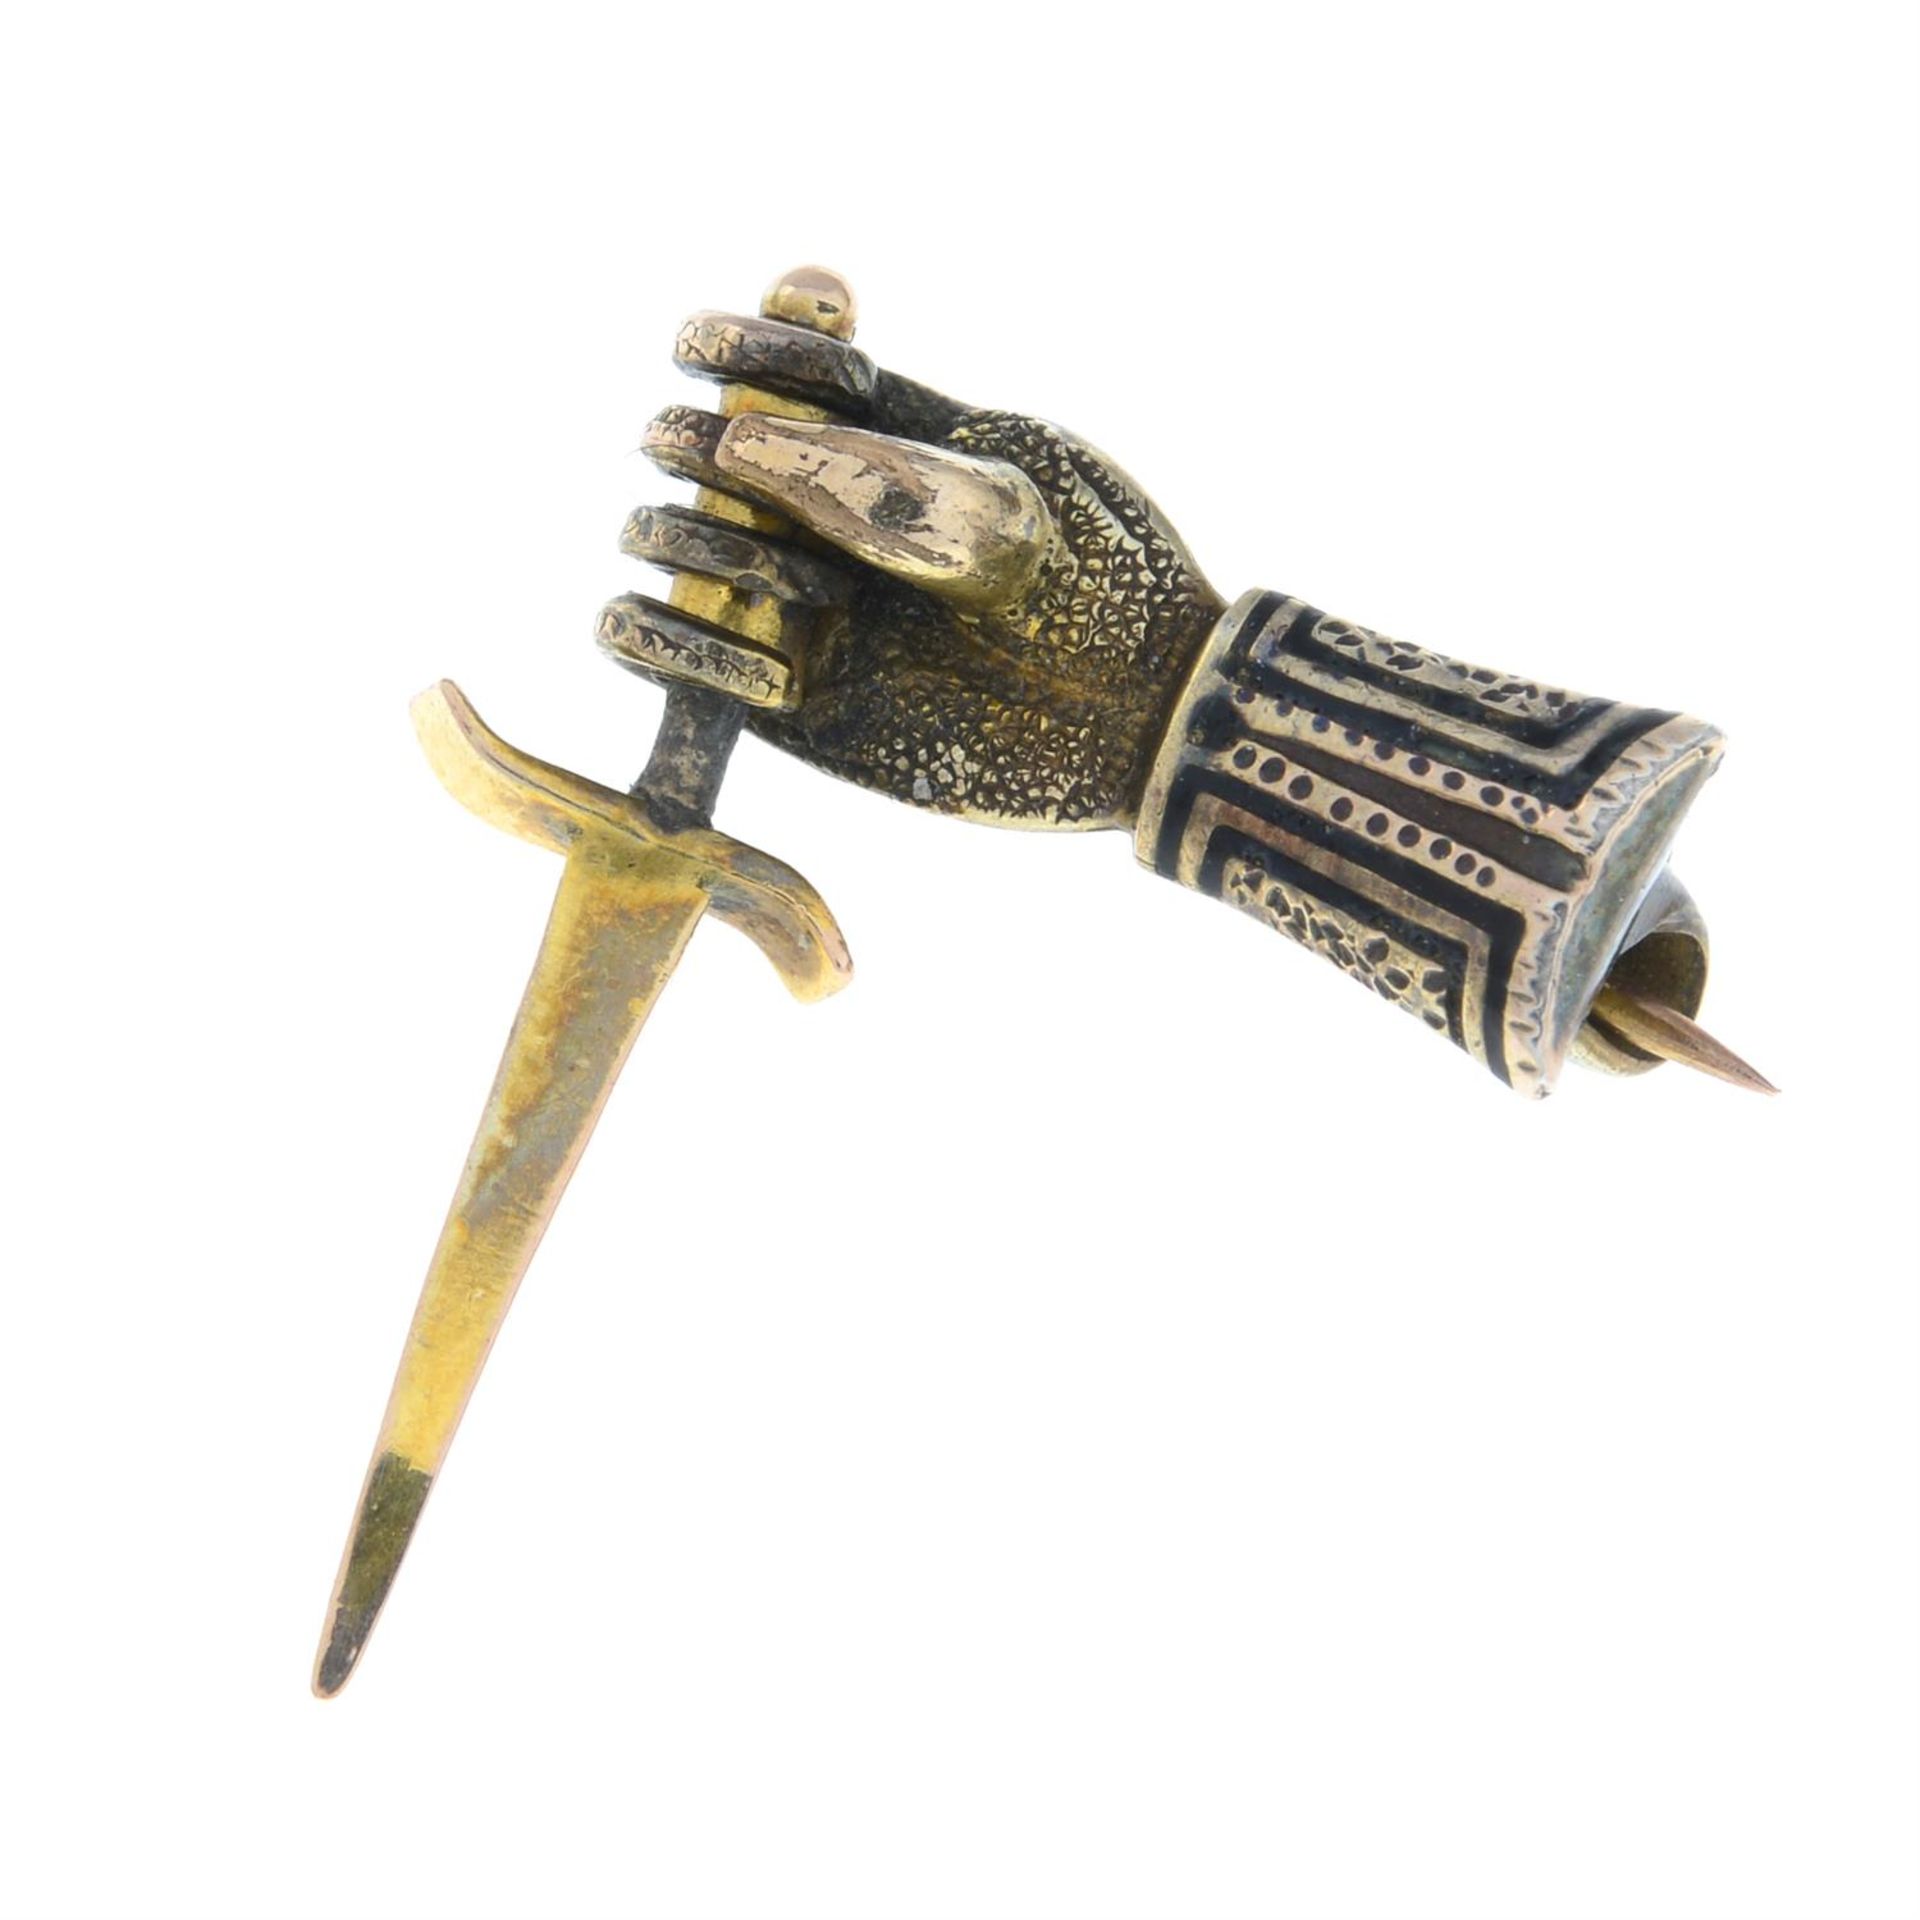 A late 19th century brooch, depicting an armoured hand holding a dagger.